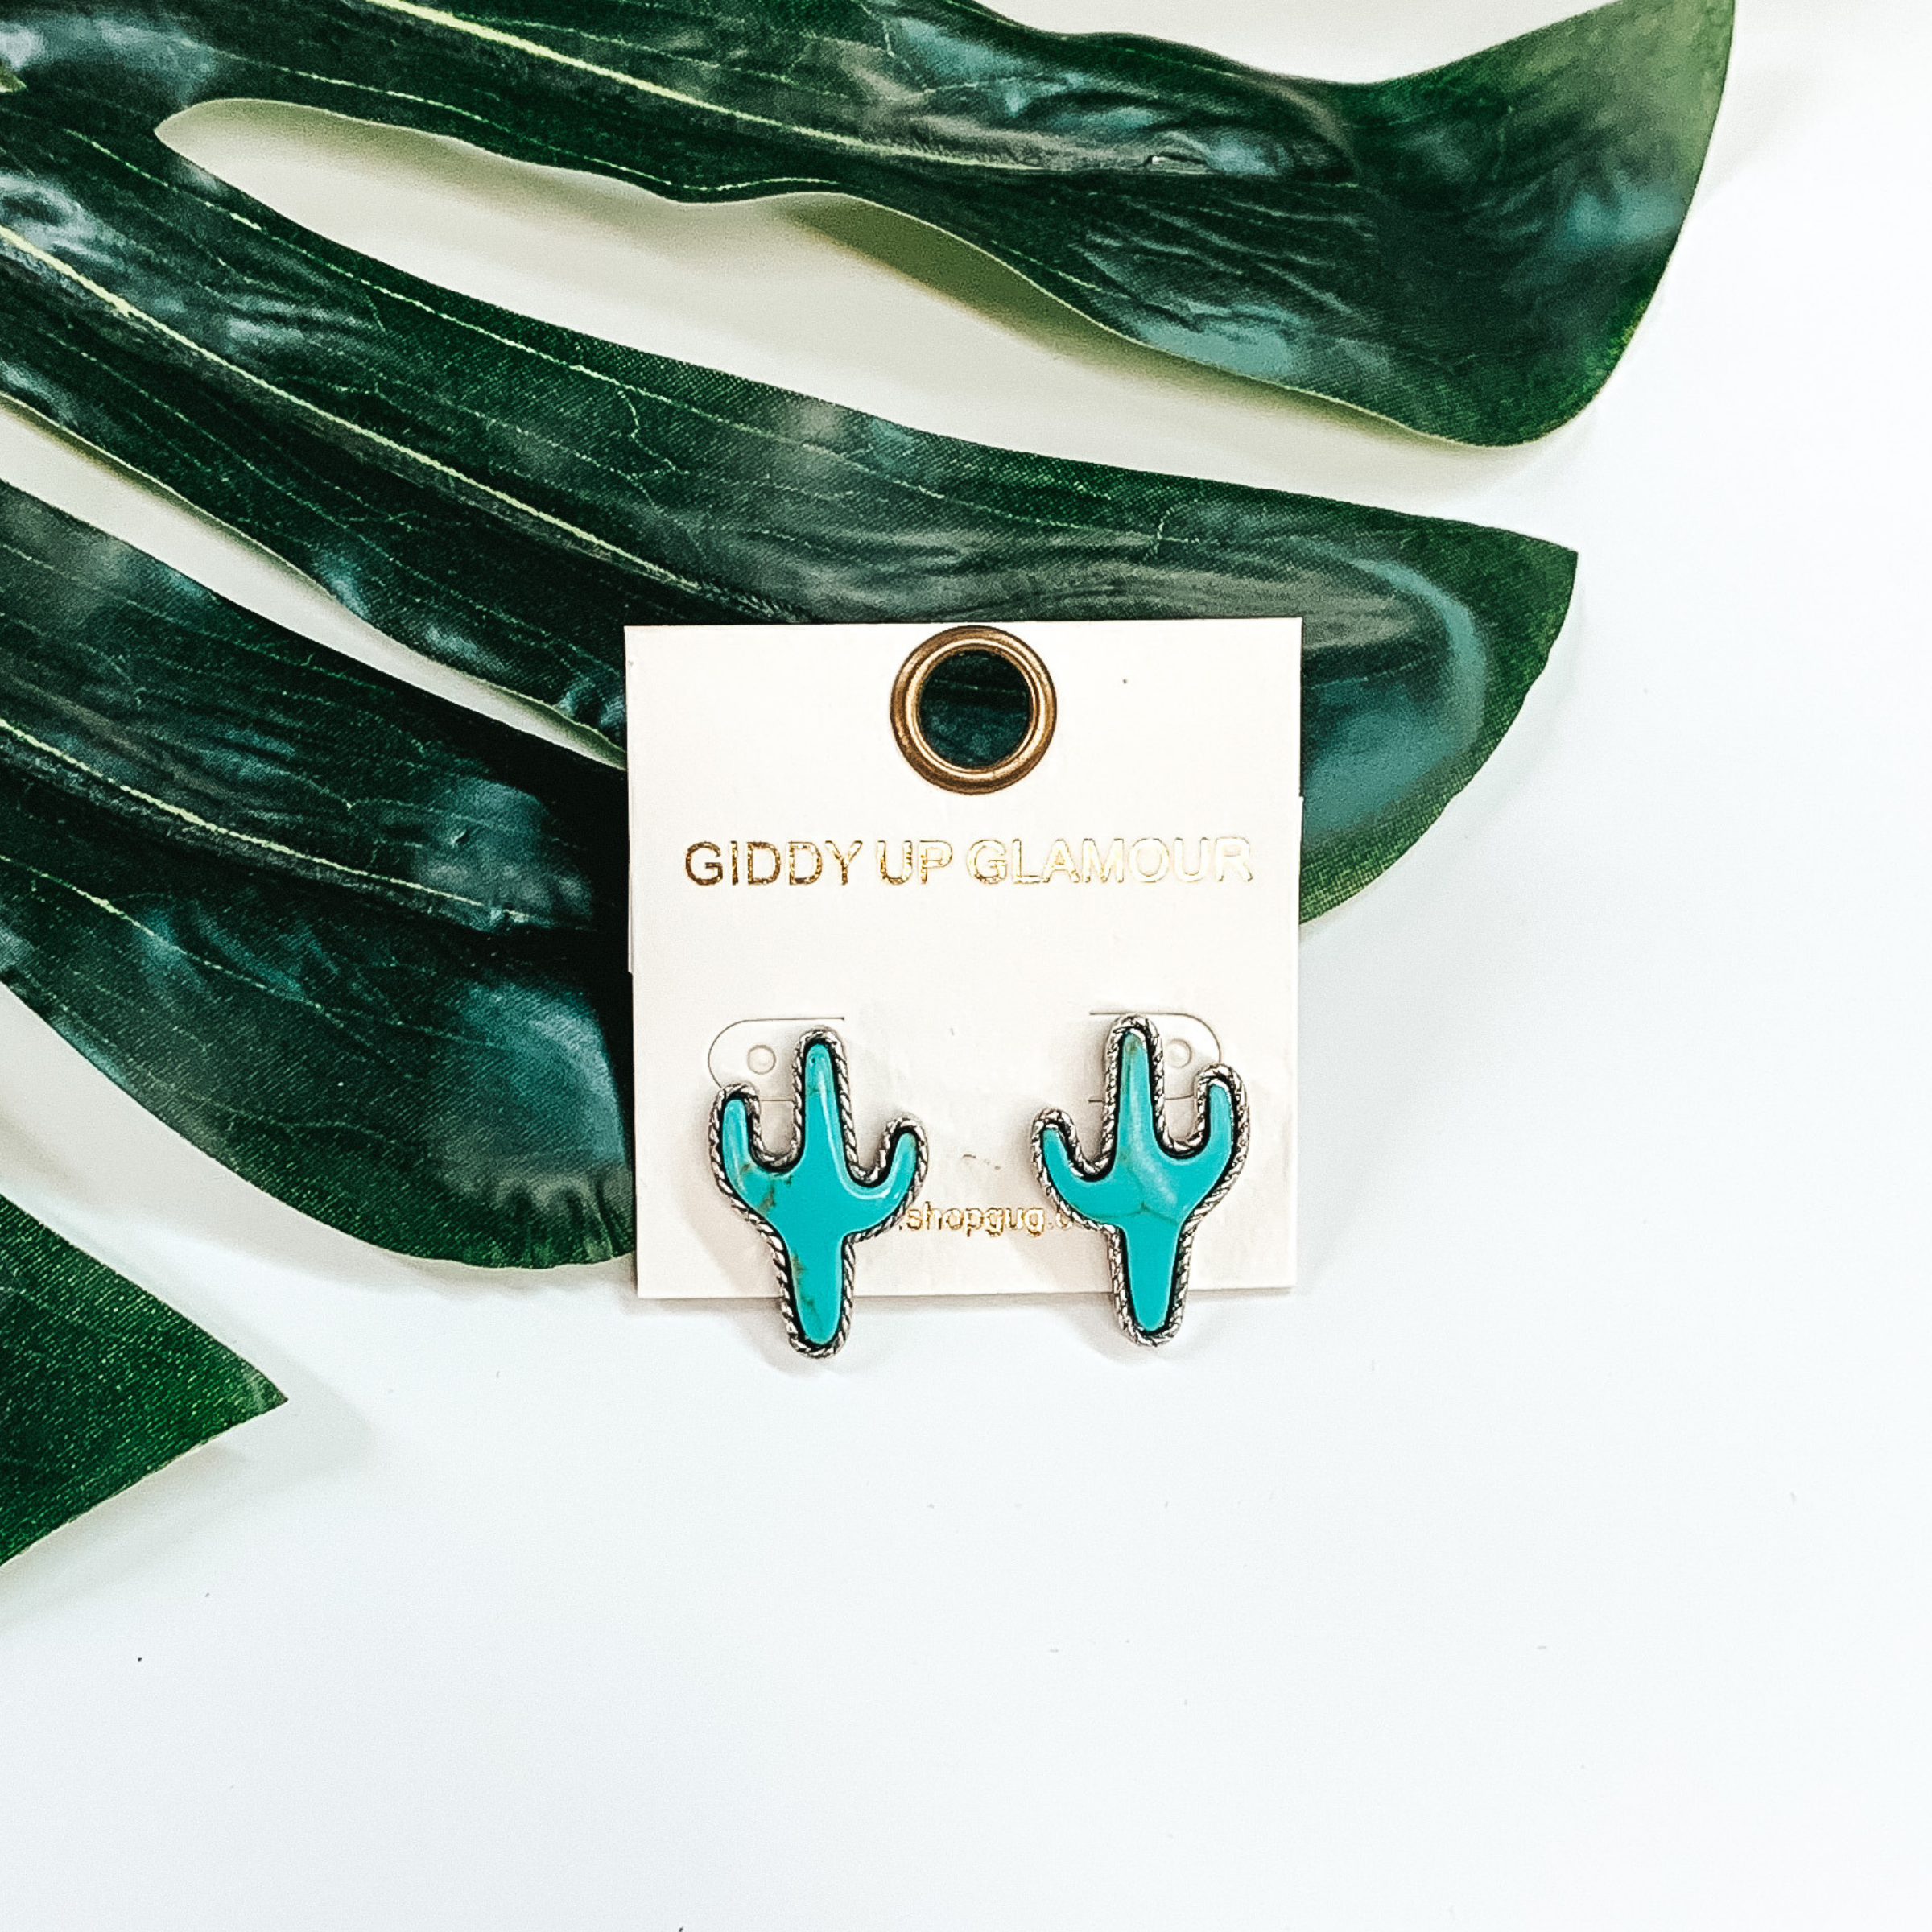 Desert Dreamin' Cactus Stud Earrings in Turquoise - Giddy Up Glamour Boutique